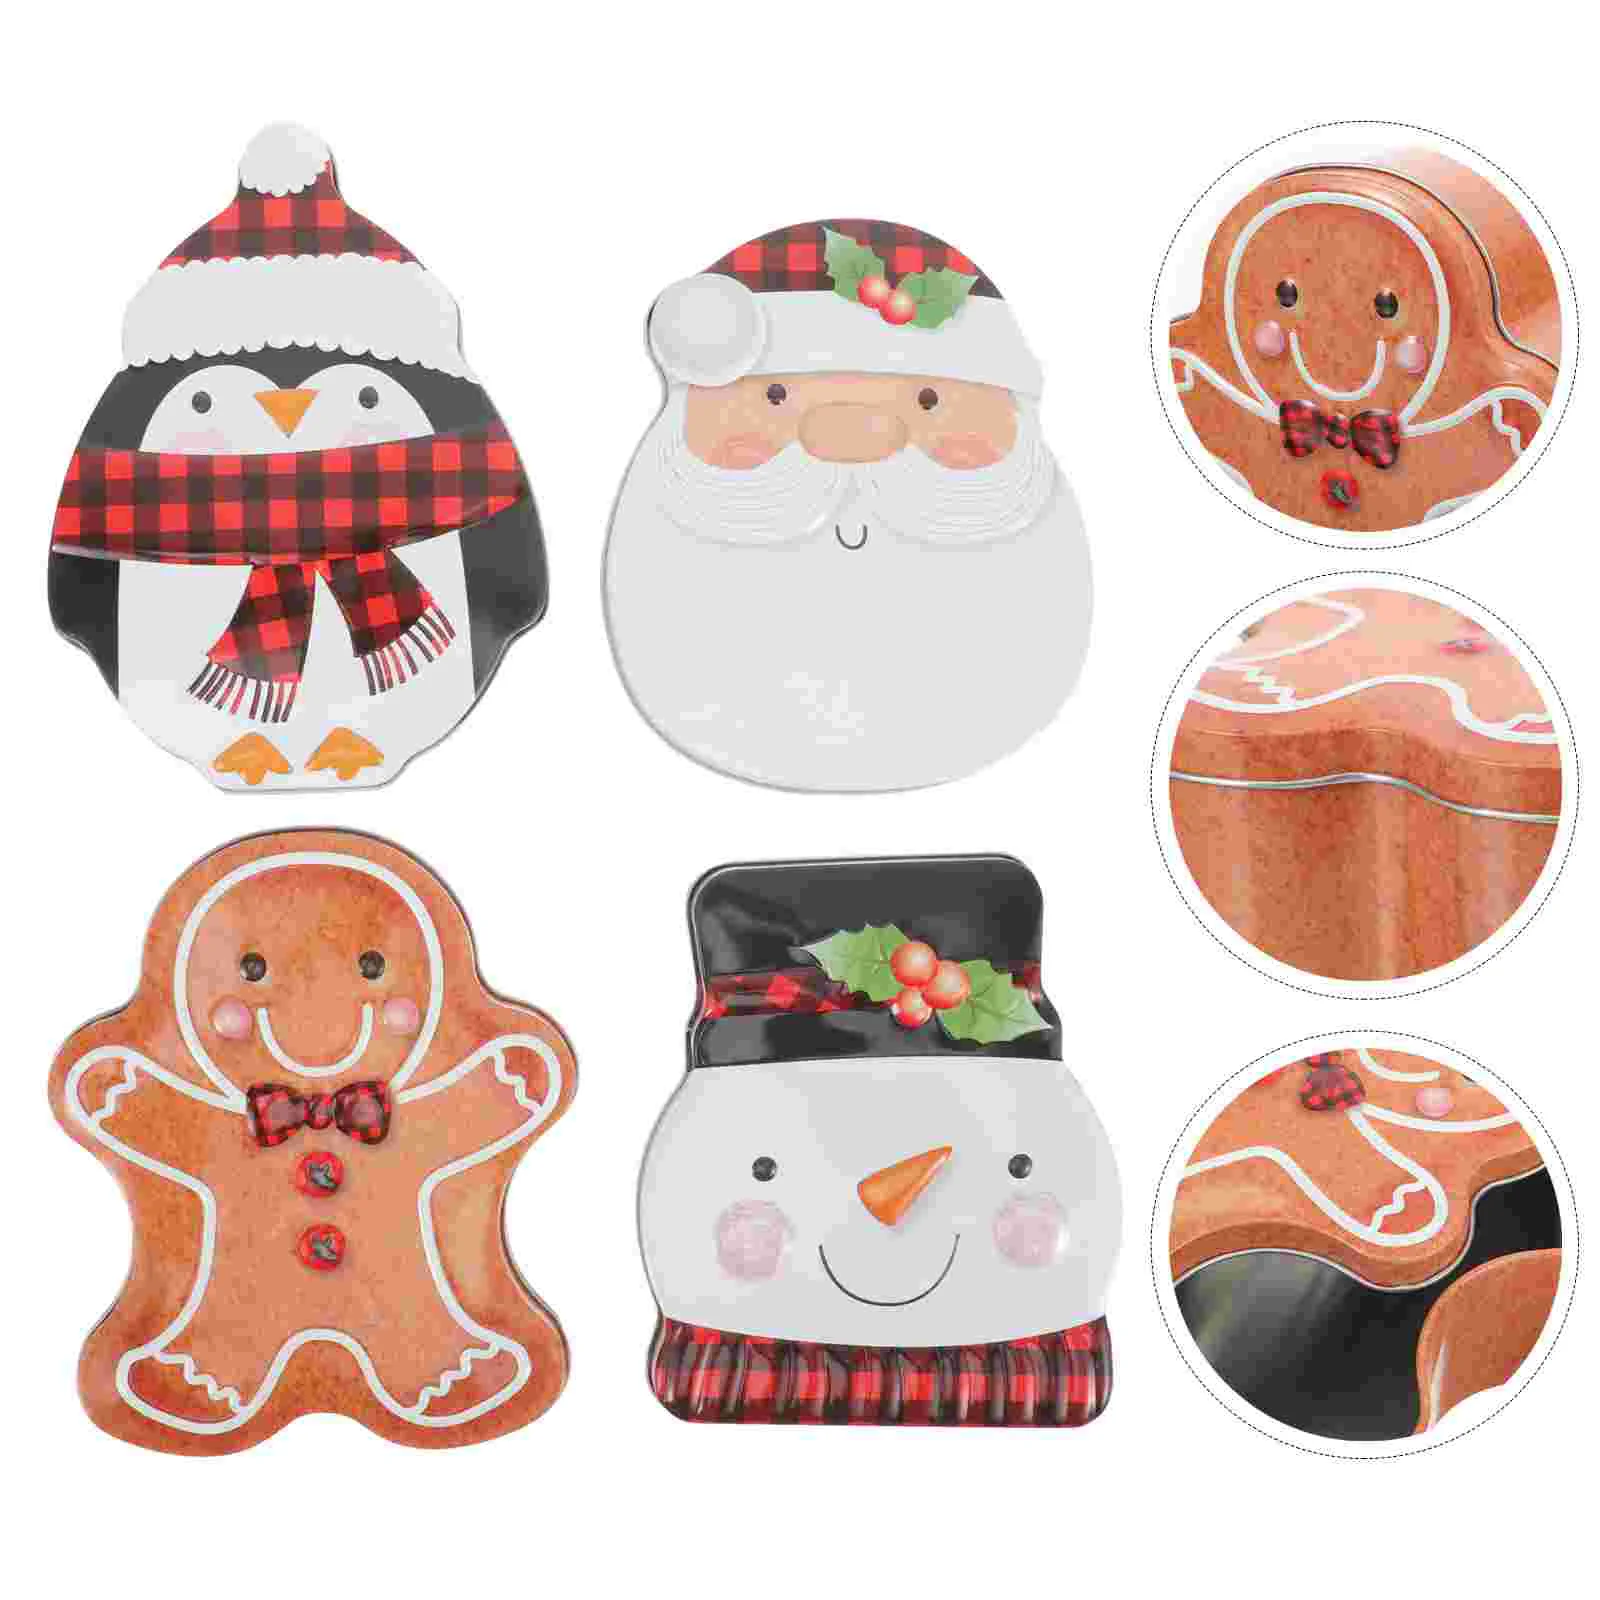 

Christmas Cookie Tins Santa Claus Snowman Candy Biscuits Box Tinplate Cookie Containers Xmas Bakery Treat Boxes Xmas Holiday